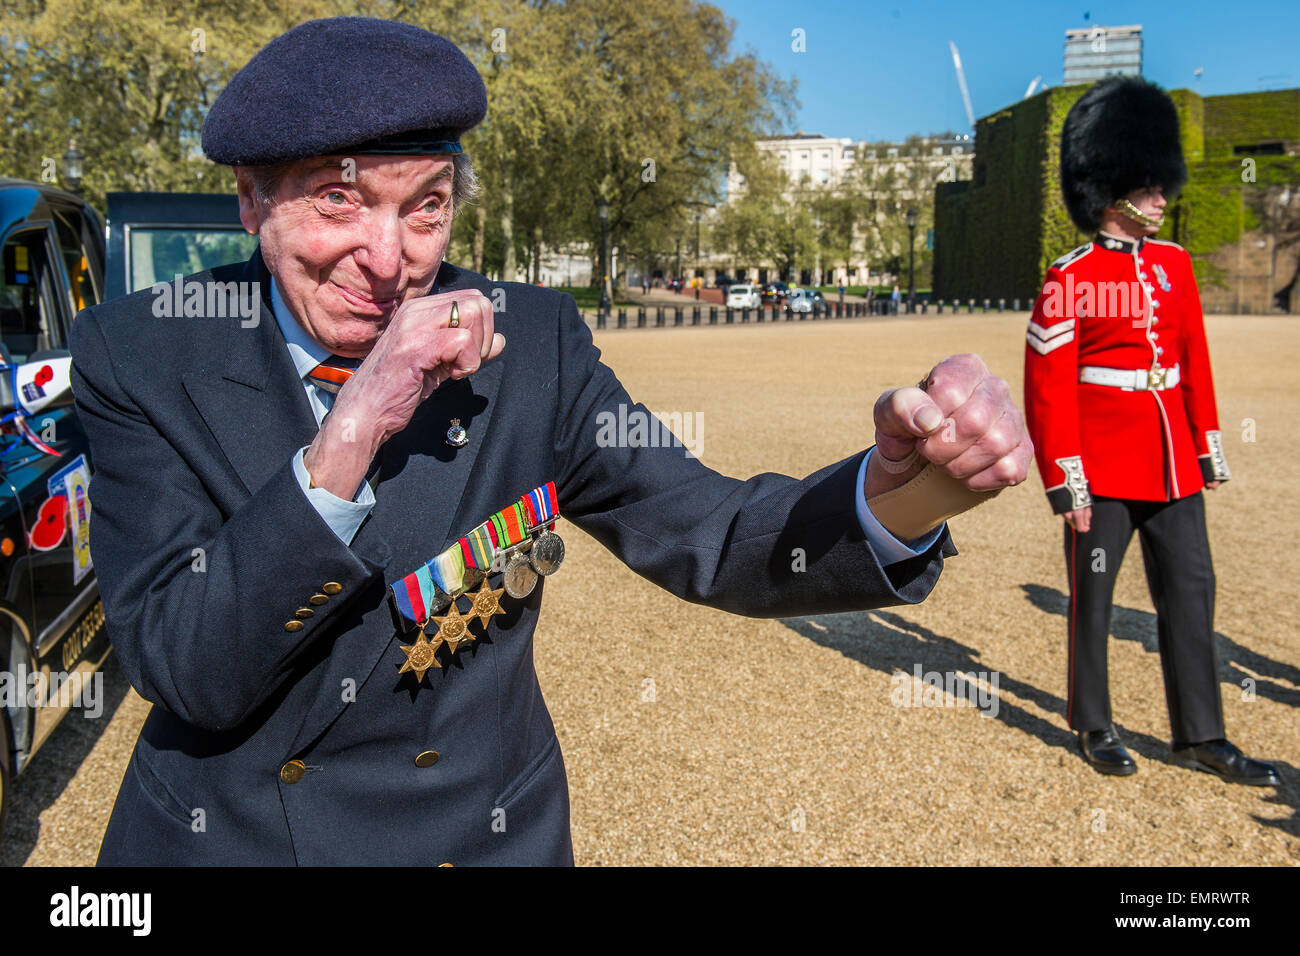 Peter Kent, 90 Royal Navy, show off his boxing skills - Second World War Veterans and serving Guardsmen on Horse Guards Parade Ground to highlight Royal British Legion events on Victory in Europe (VE) Day. The Legion is also announcing that veterans and their carers will receive funding towards attending the event on the weekend of the 8-10th May.  Places will be available for a series of commemorative events over the weekend including on VE Day itself, Friday 8 May, when a Service of Remembrance will be held at The Cenotaph, with a national two min Stock Photo